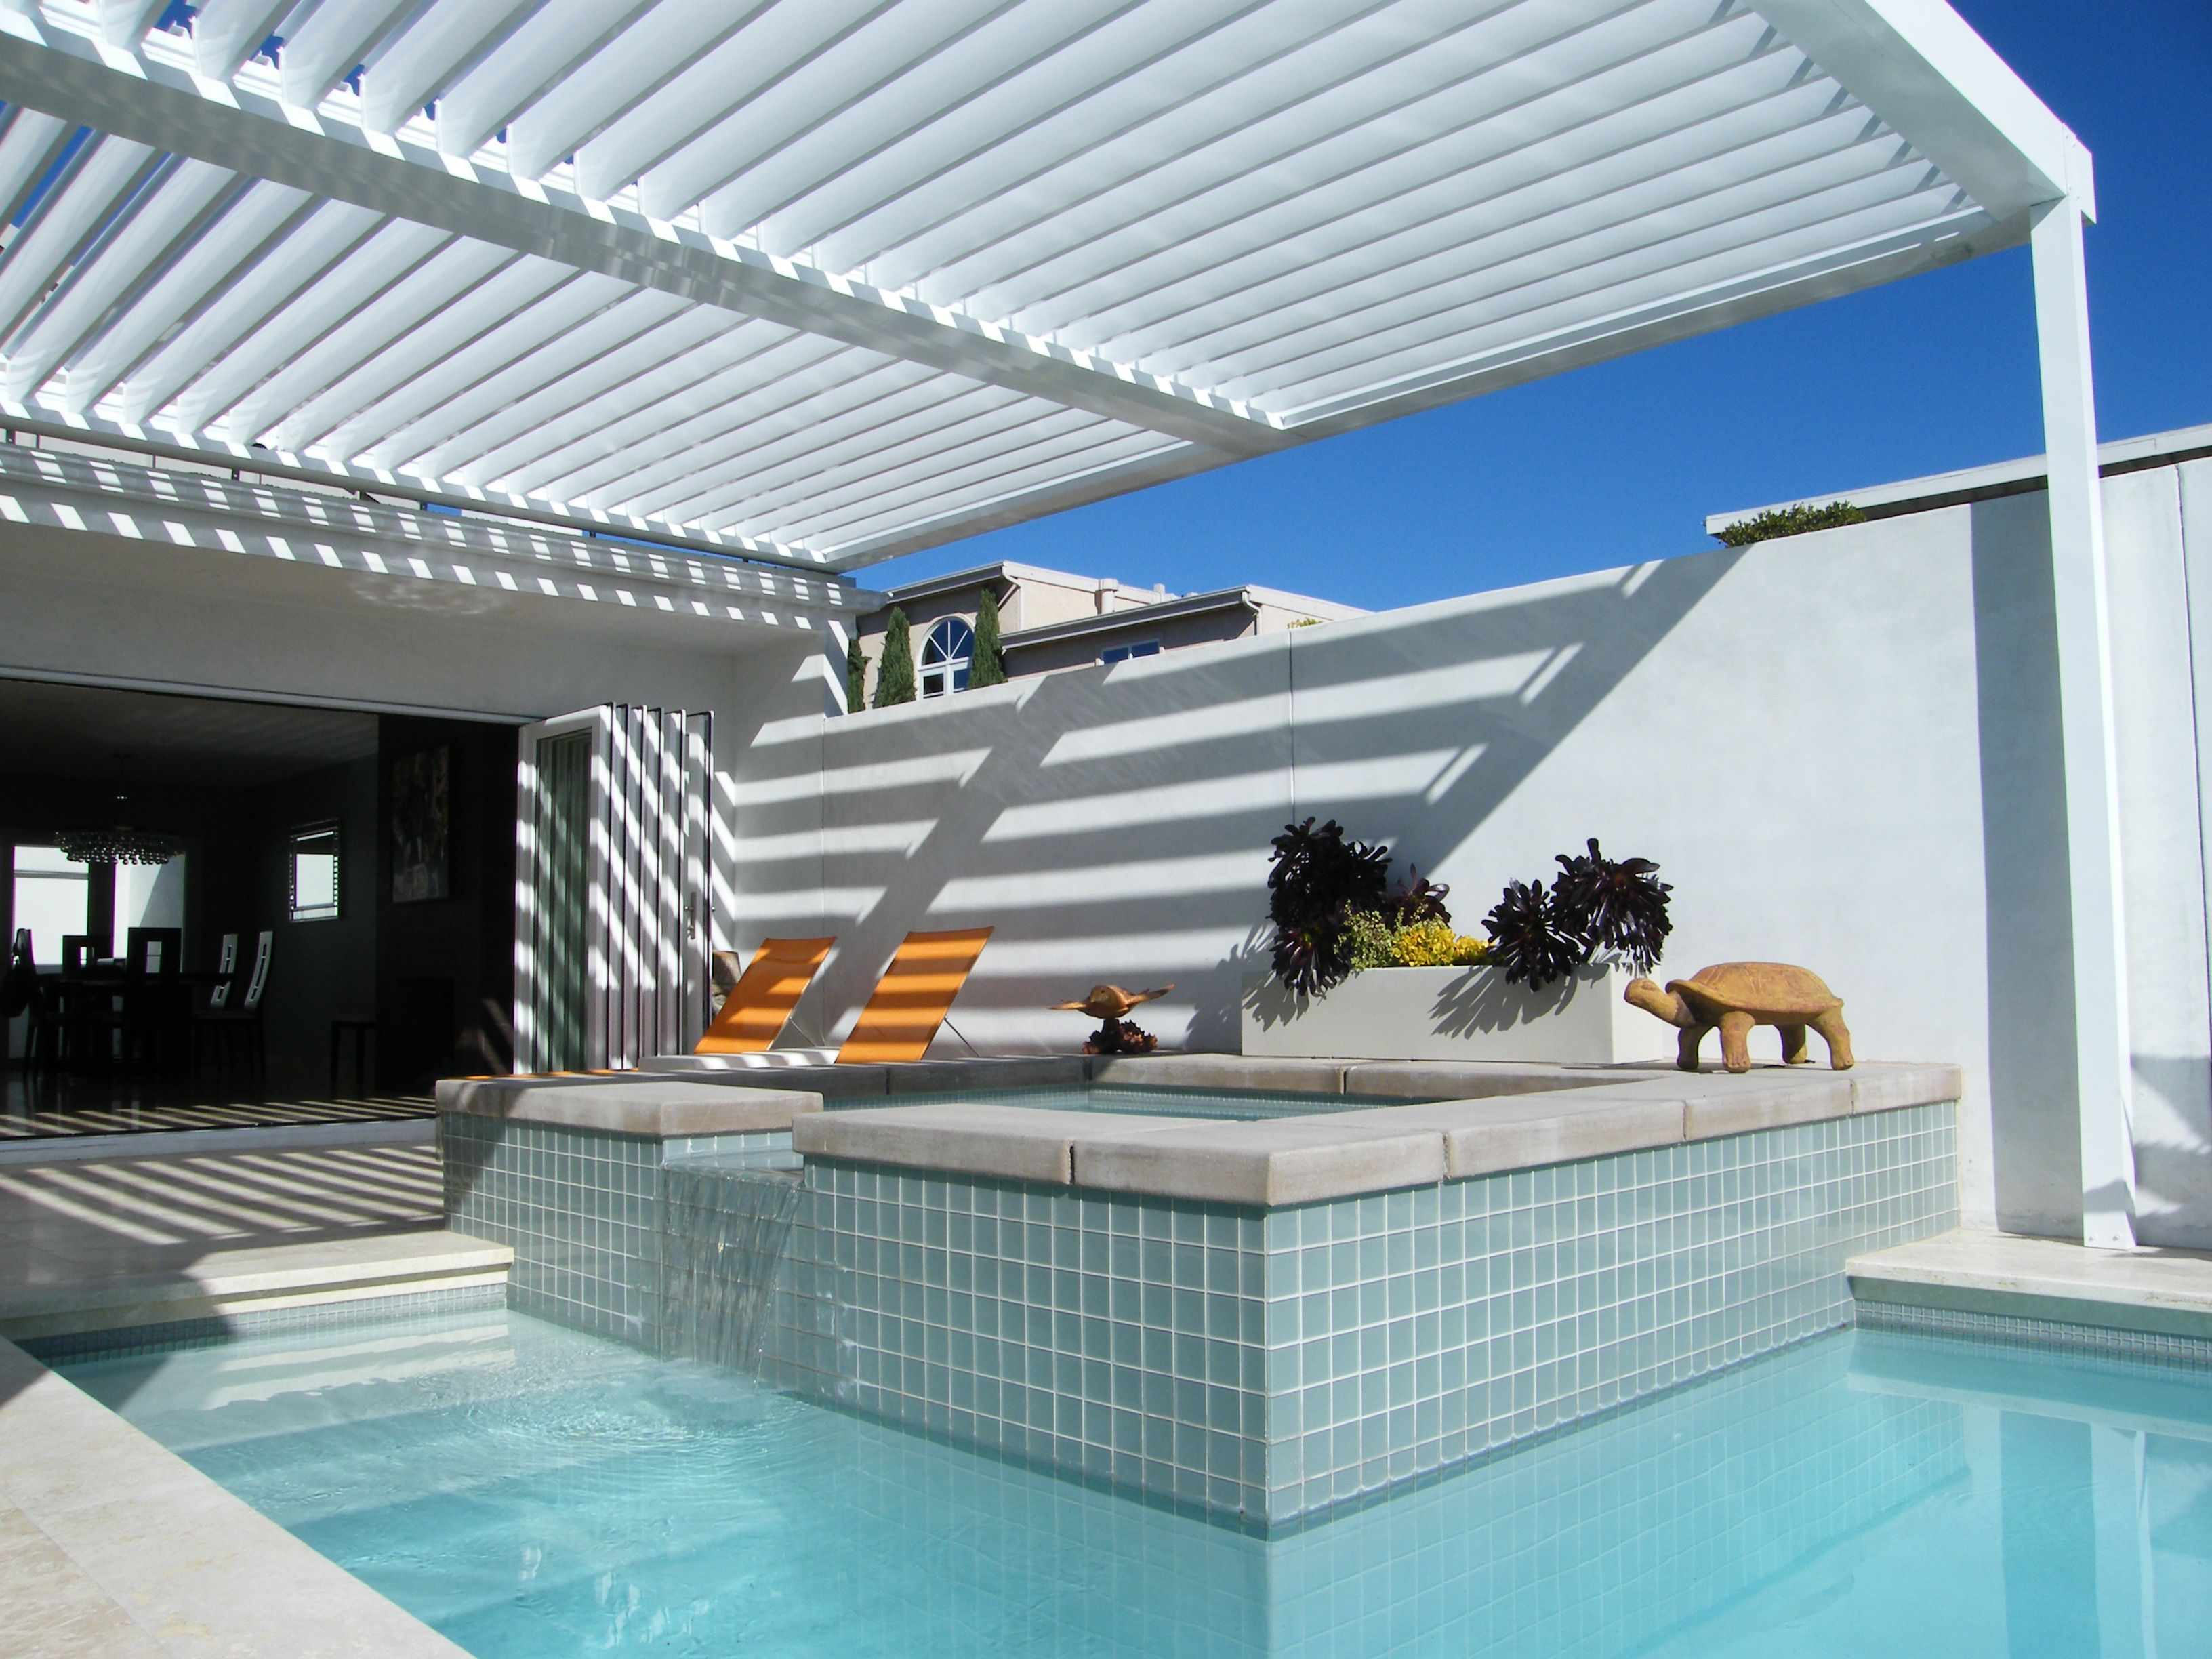 Equinox Louvered Roof System Patio Cover Alumawood Factory intended for proportions 3264 X 2448